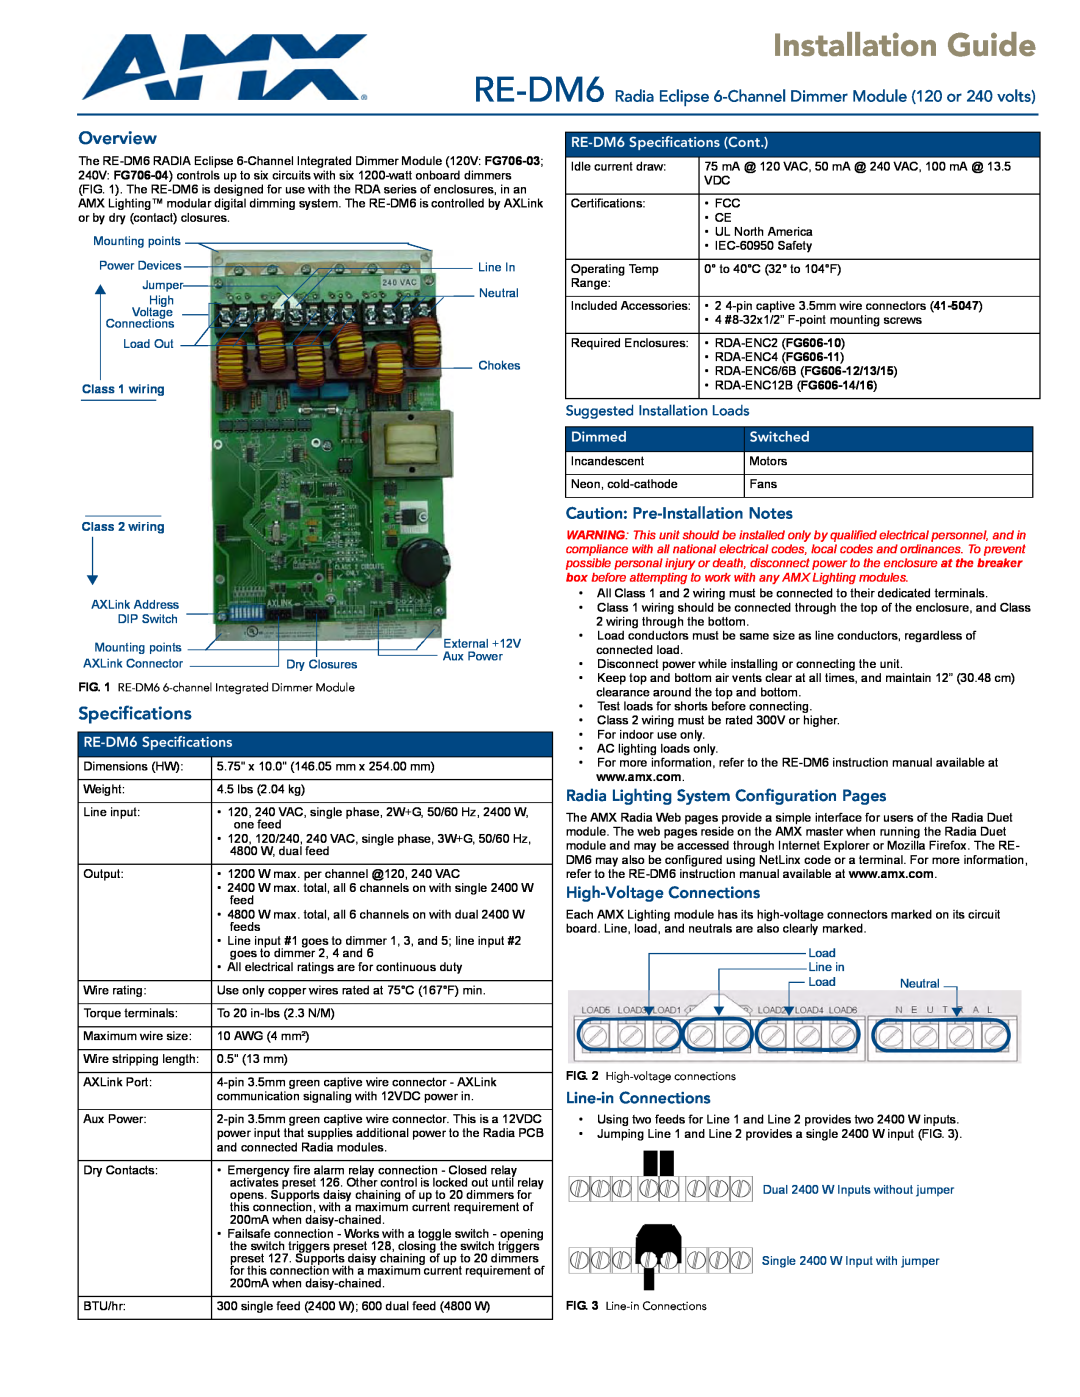 AMX specifications RE-DM6 Radia Eclipse 6-Channel Dimmer Module 120 or 240 volts, Caution Pre-Installation Notes 